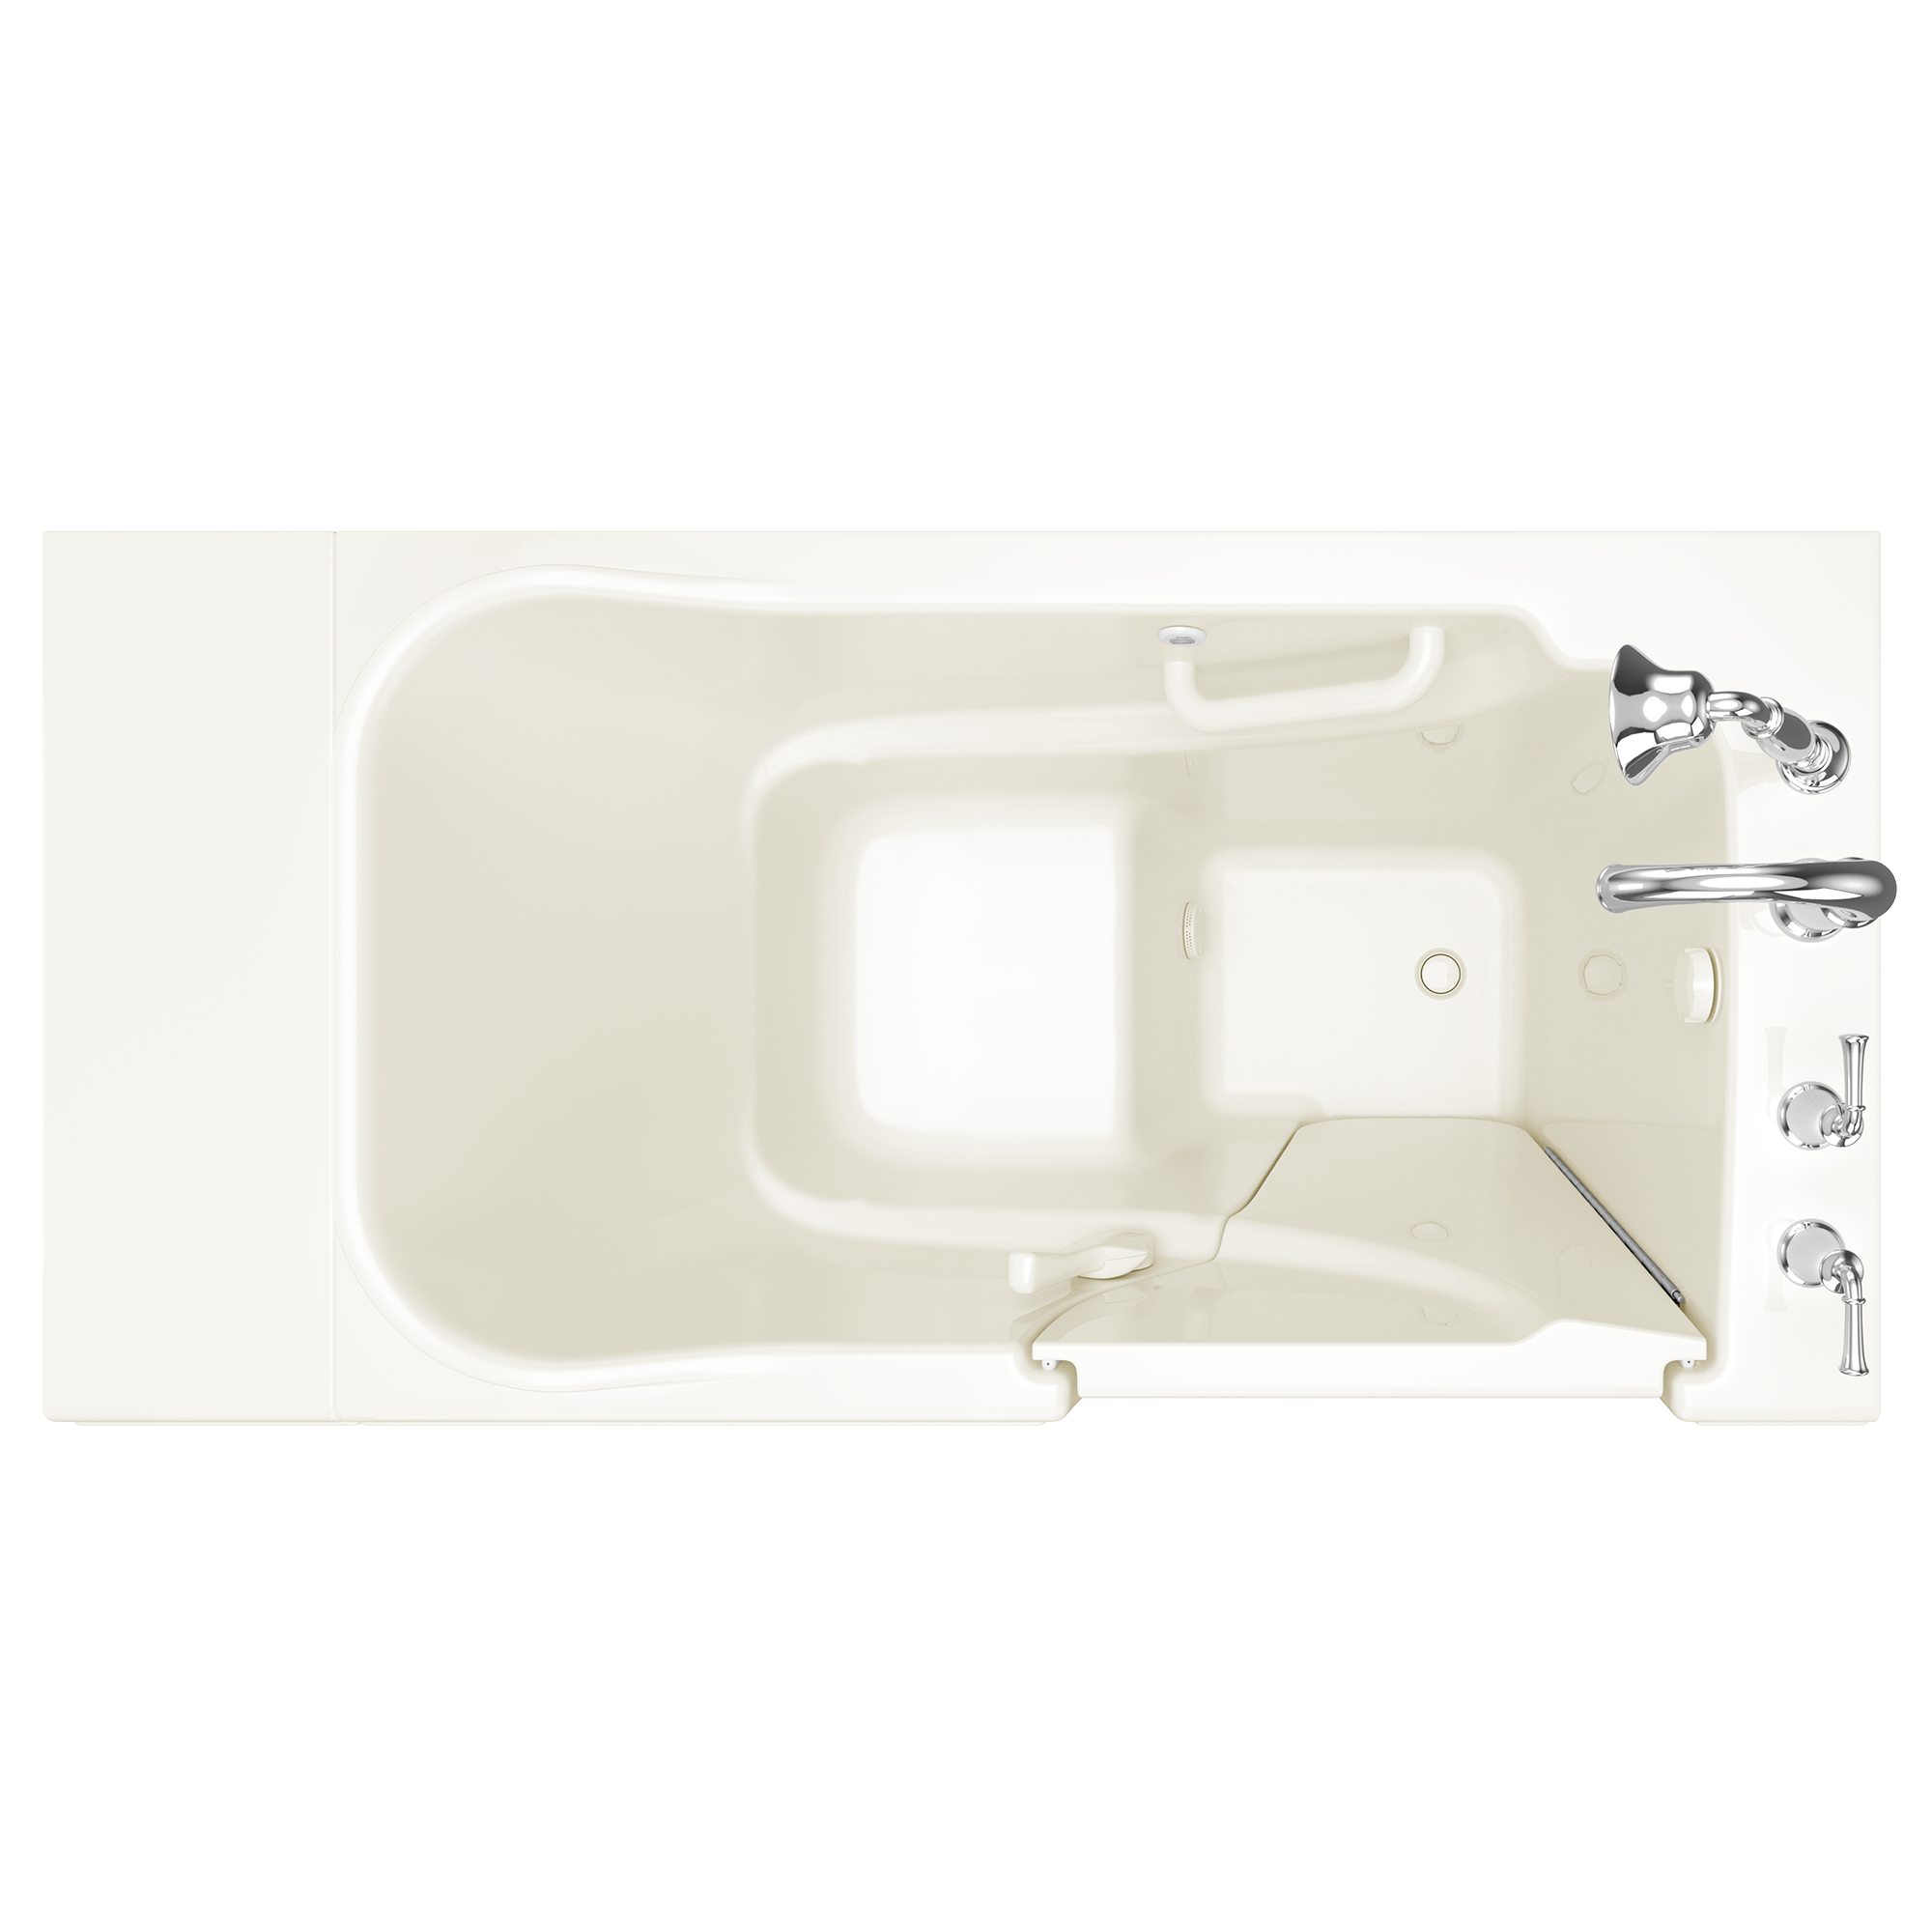 GEL Walk In Tub 52X30 Right Hand Soaker Biscuit ST BISCUIT